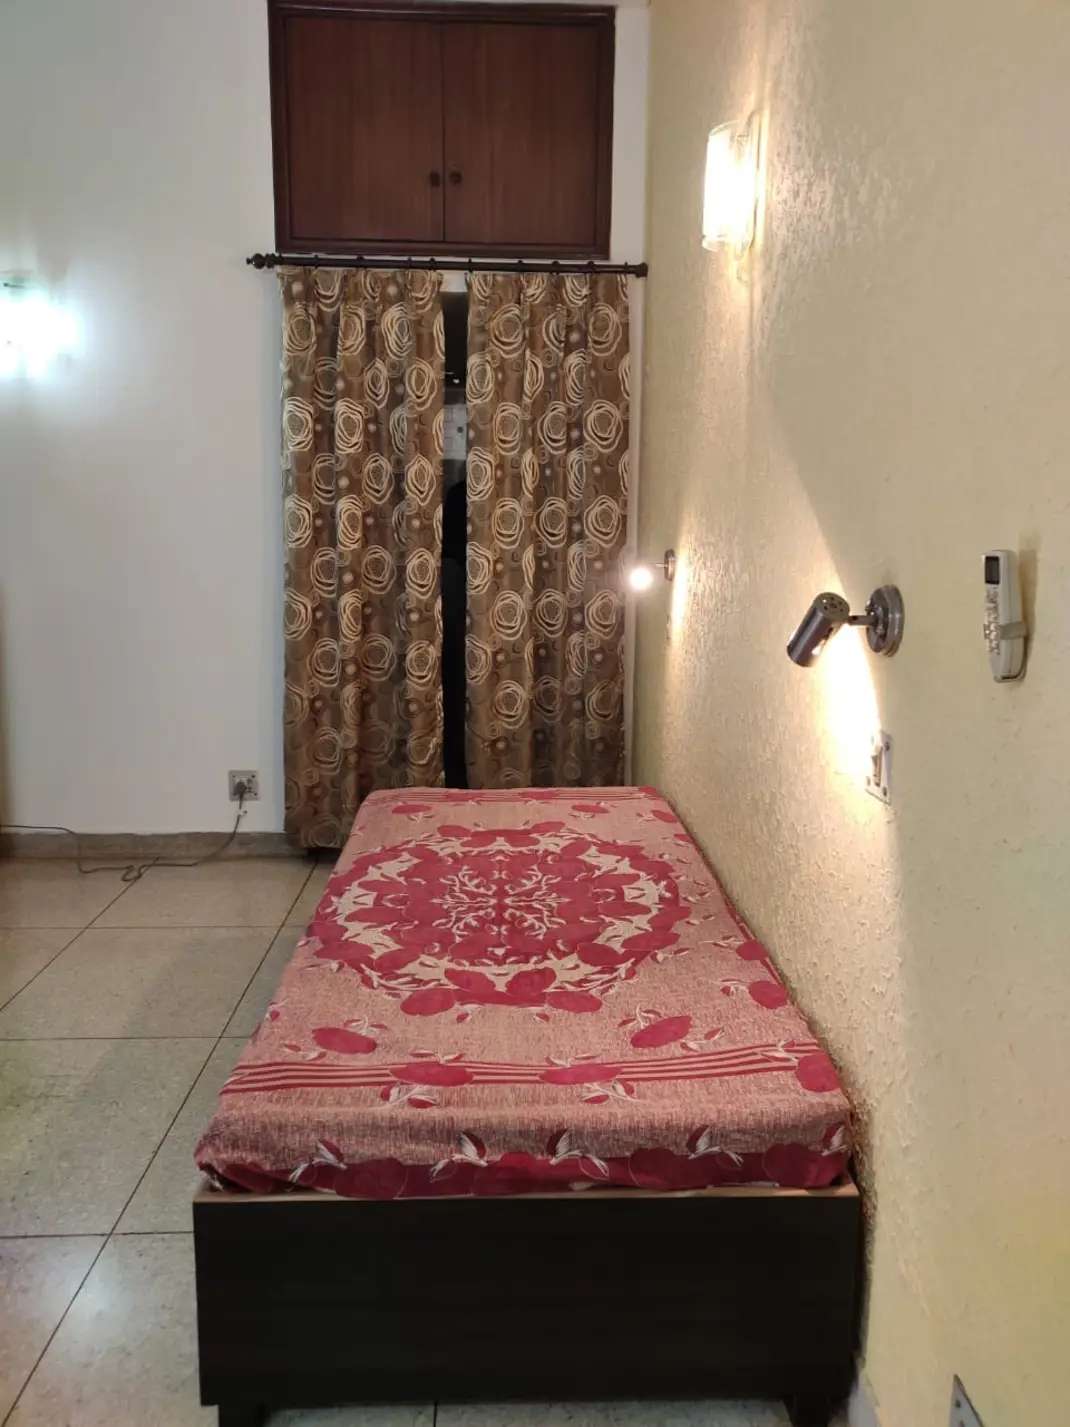 1 Bed/ 1 Bath Rent Apartment/ Flat, Furnished for rent @Greater kailash South Delhi 